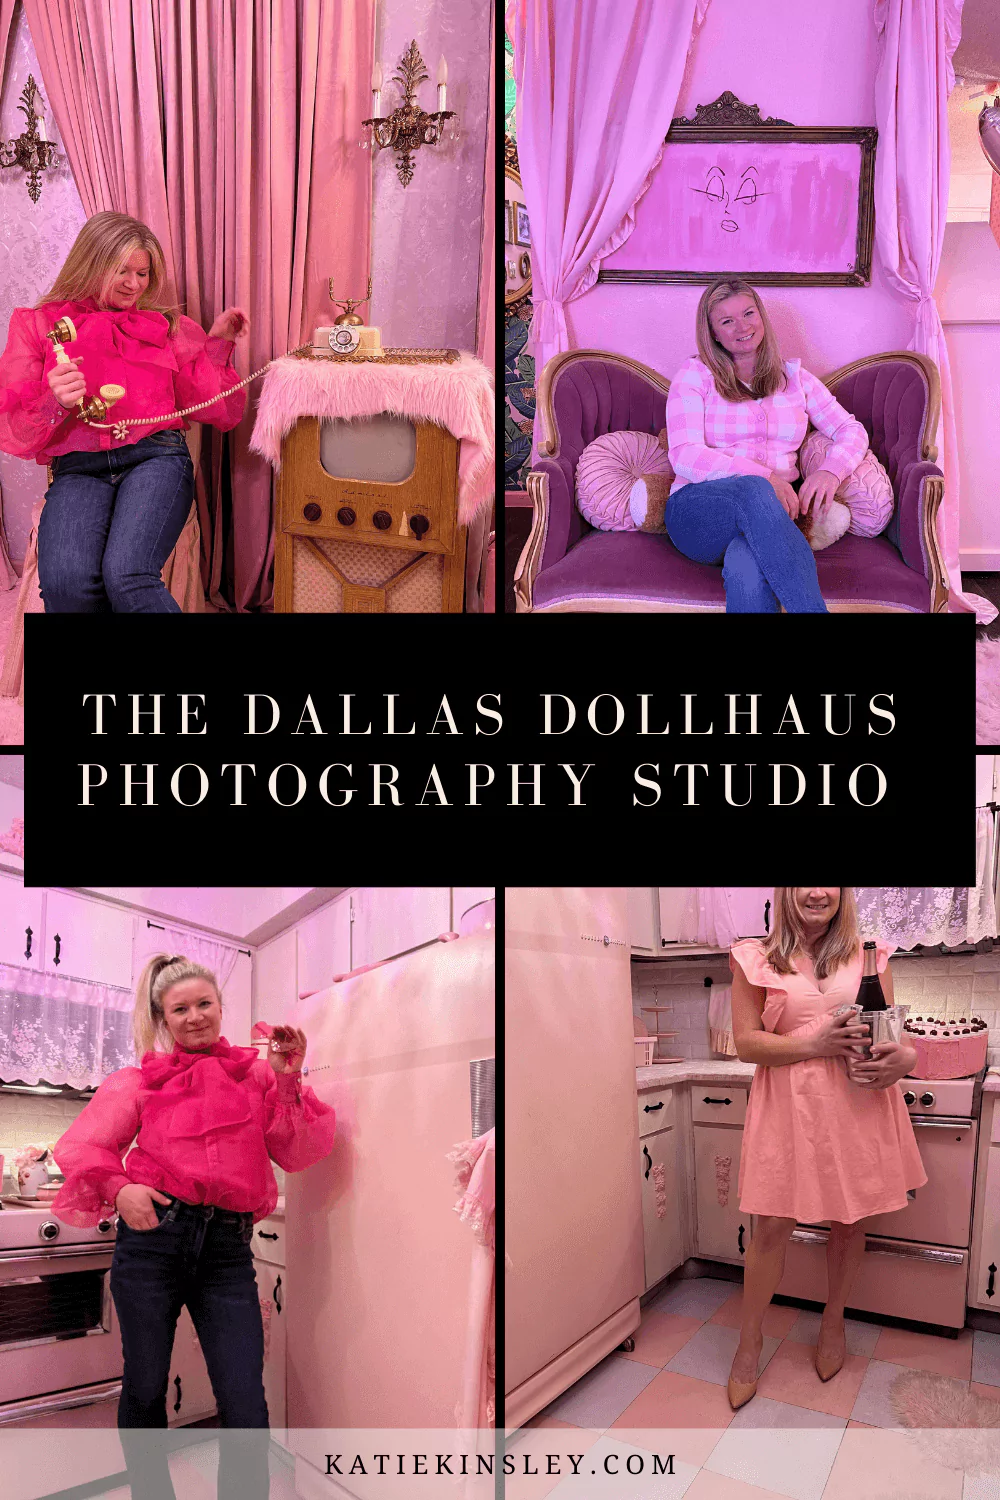 The Dallas Dollhaus Photography Studio